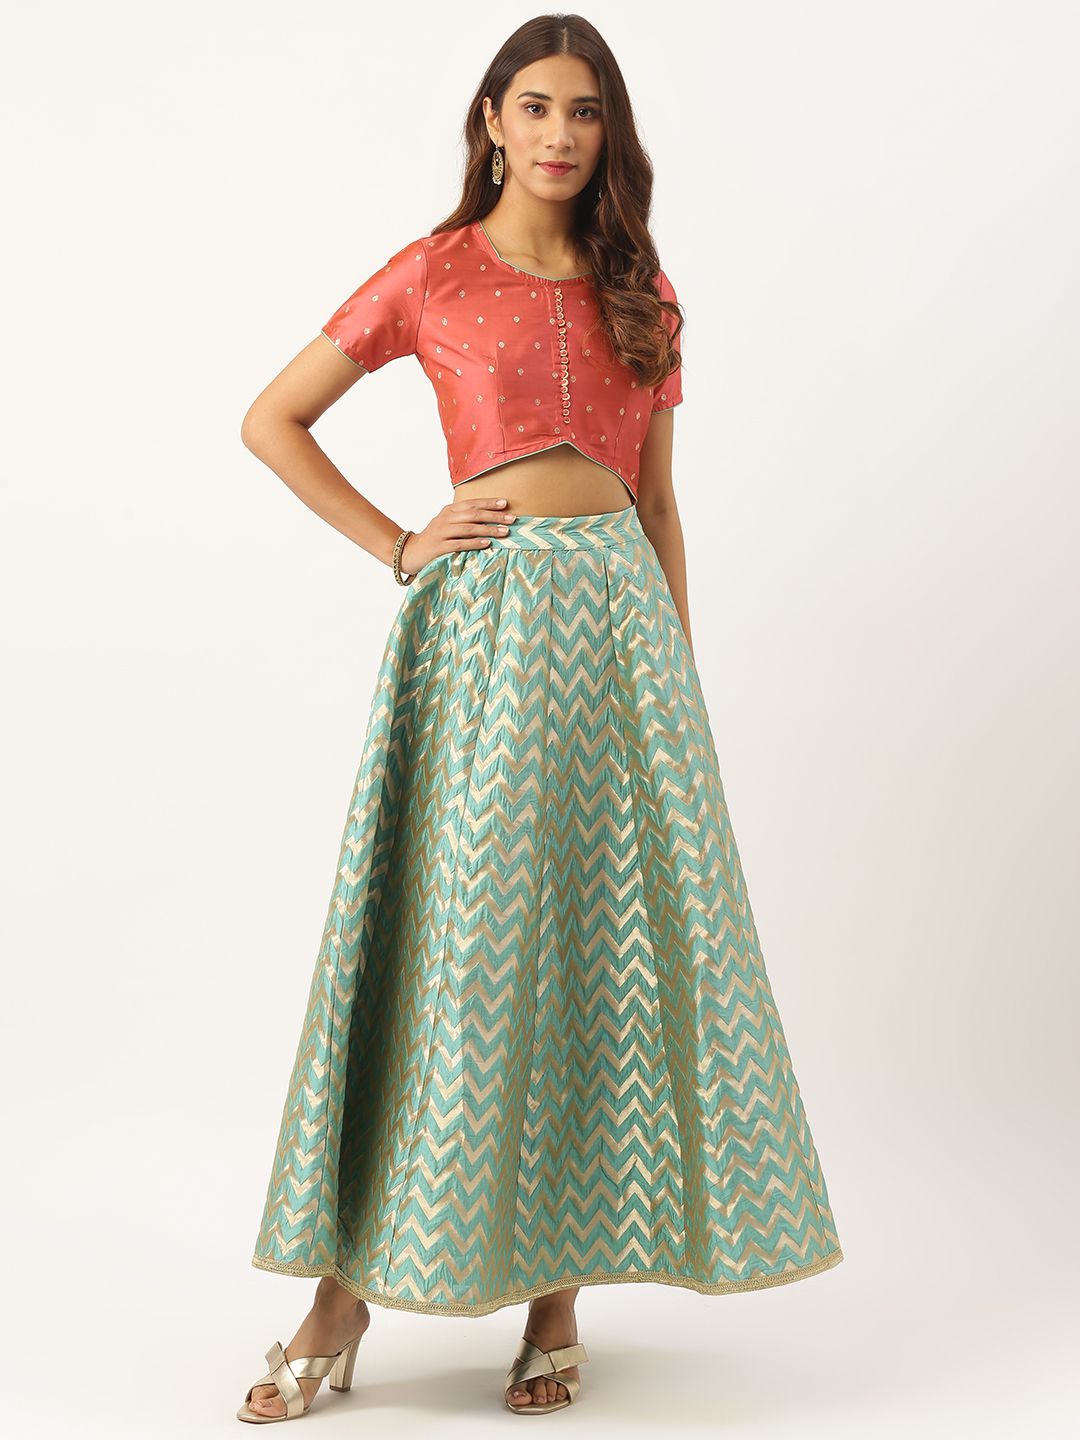 Aayna Women Peach-Coloured & Green Self Design Top with Skirt Price in India